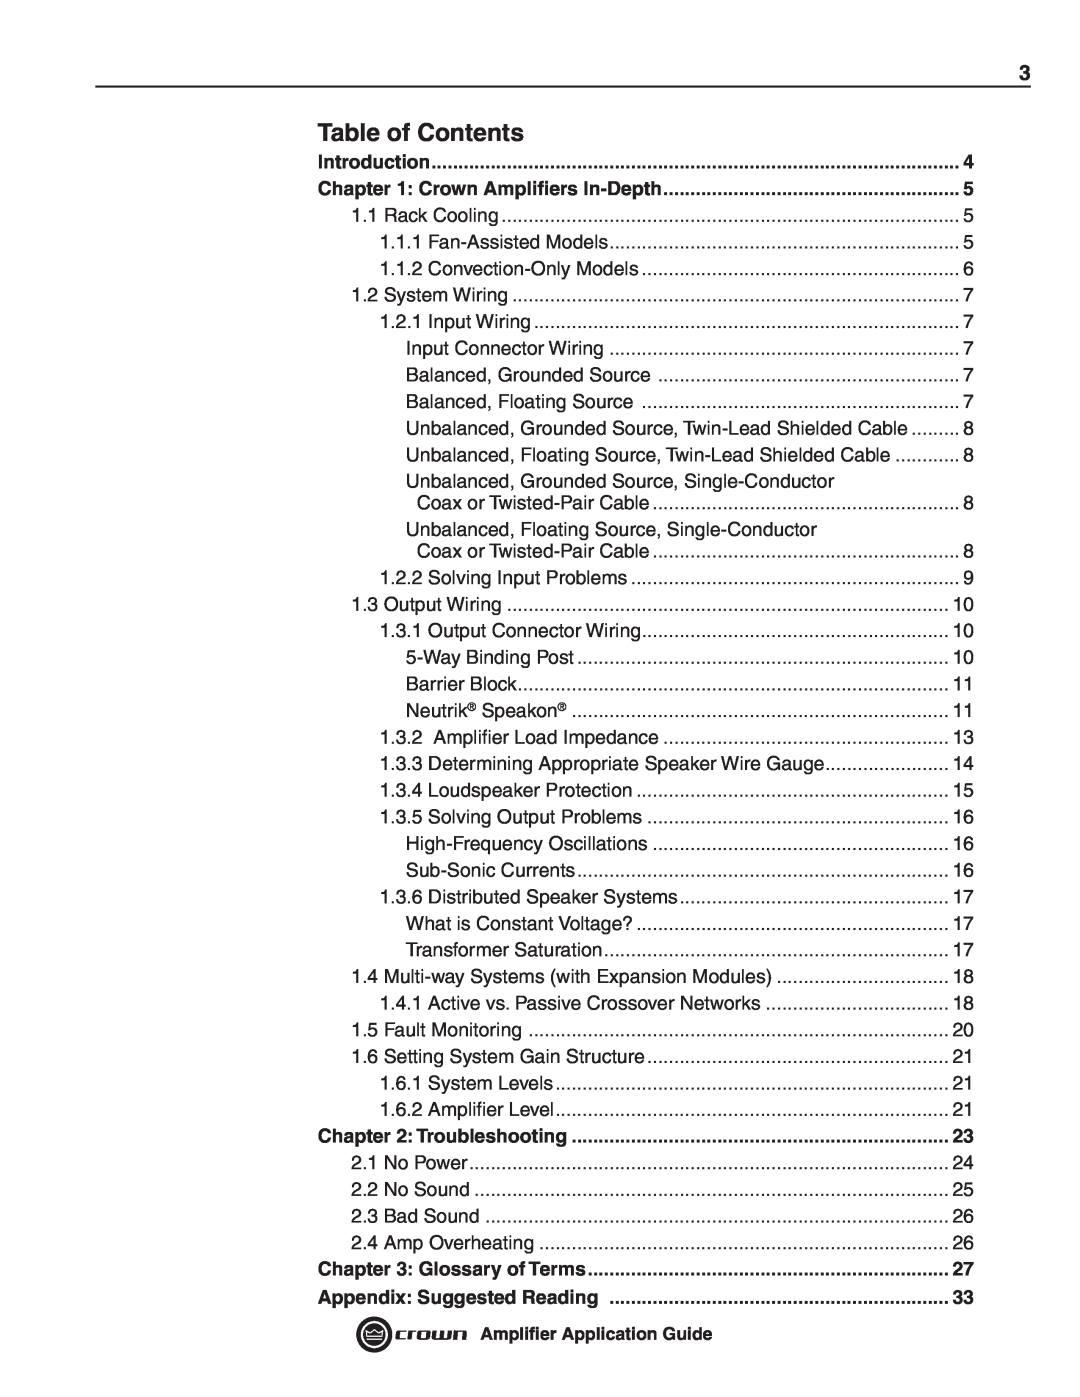 Crown Audio 133472-1A Table of Contents, Introduction, Troubleshooting, Glossary of Terms, Appendix Suggested Reading 